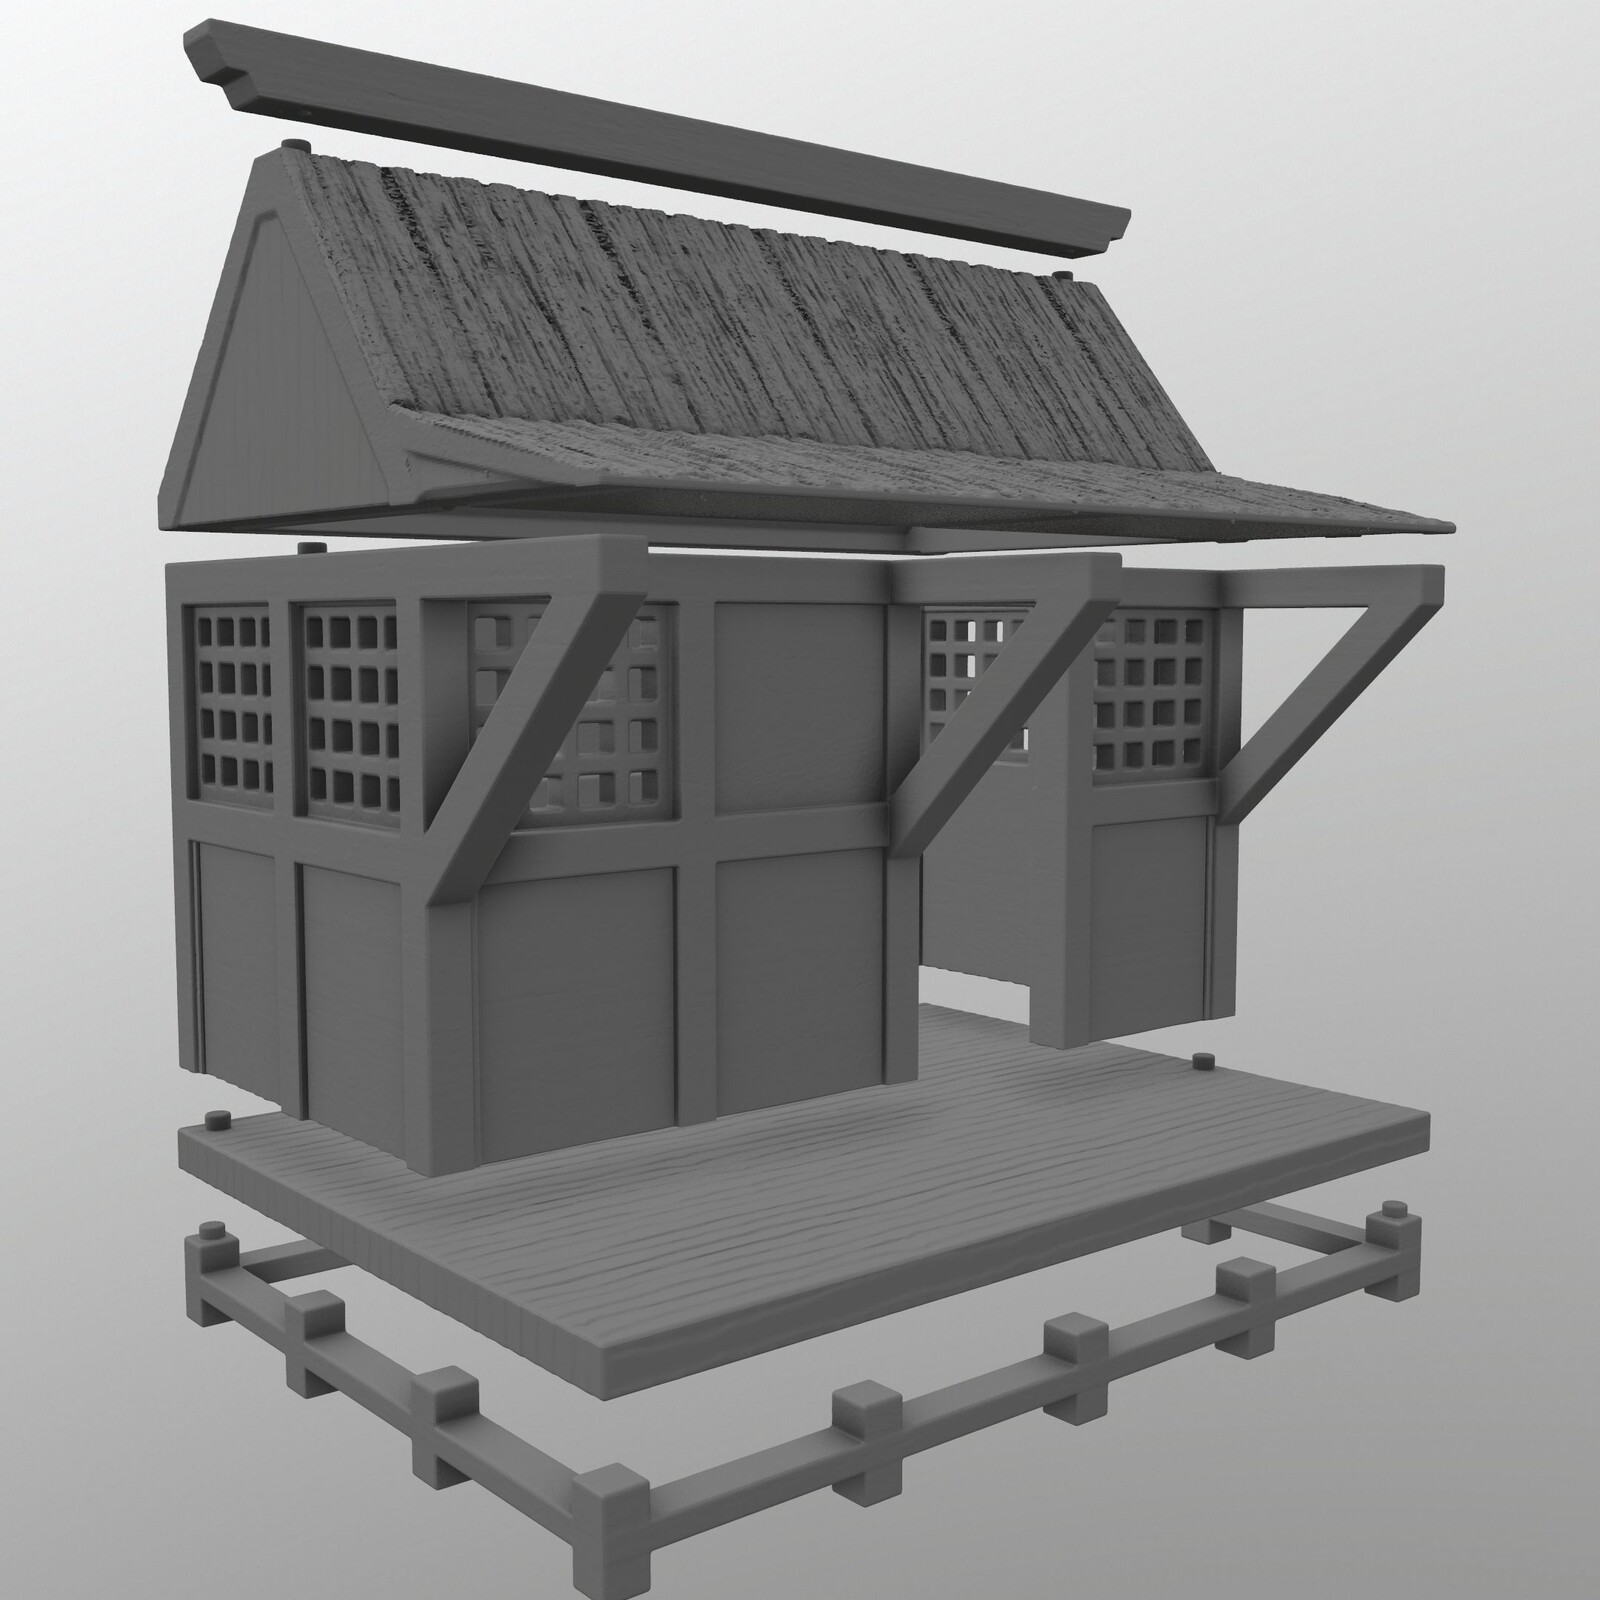 Toolbag render of the various pieces of the barrack.